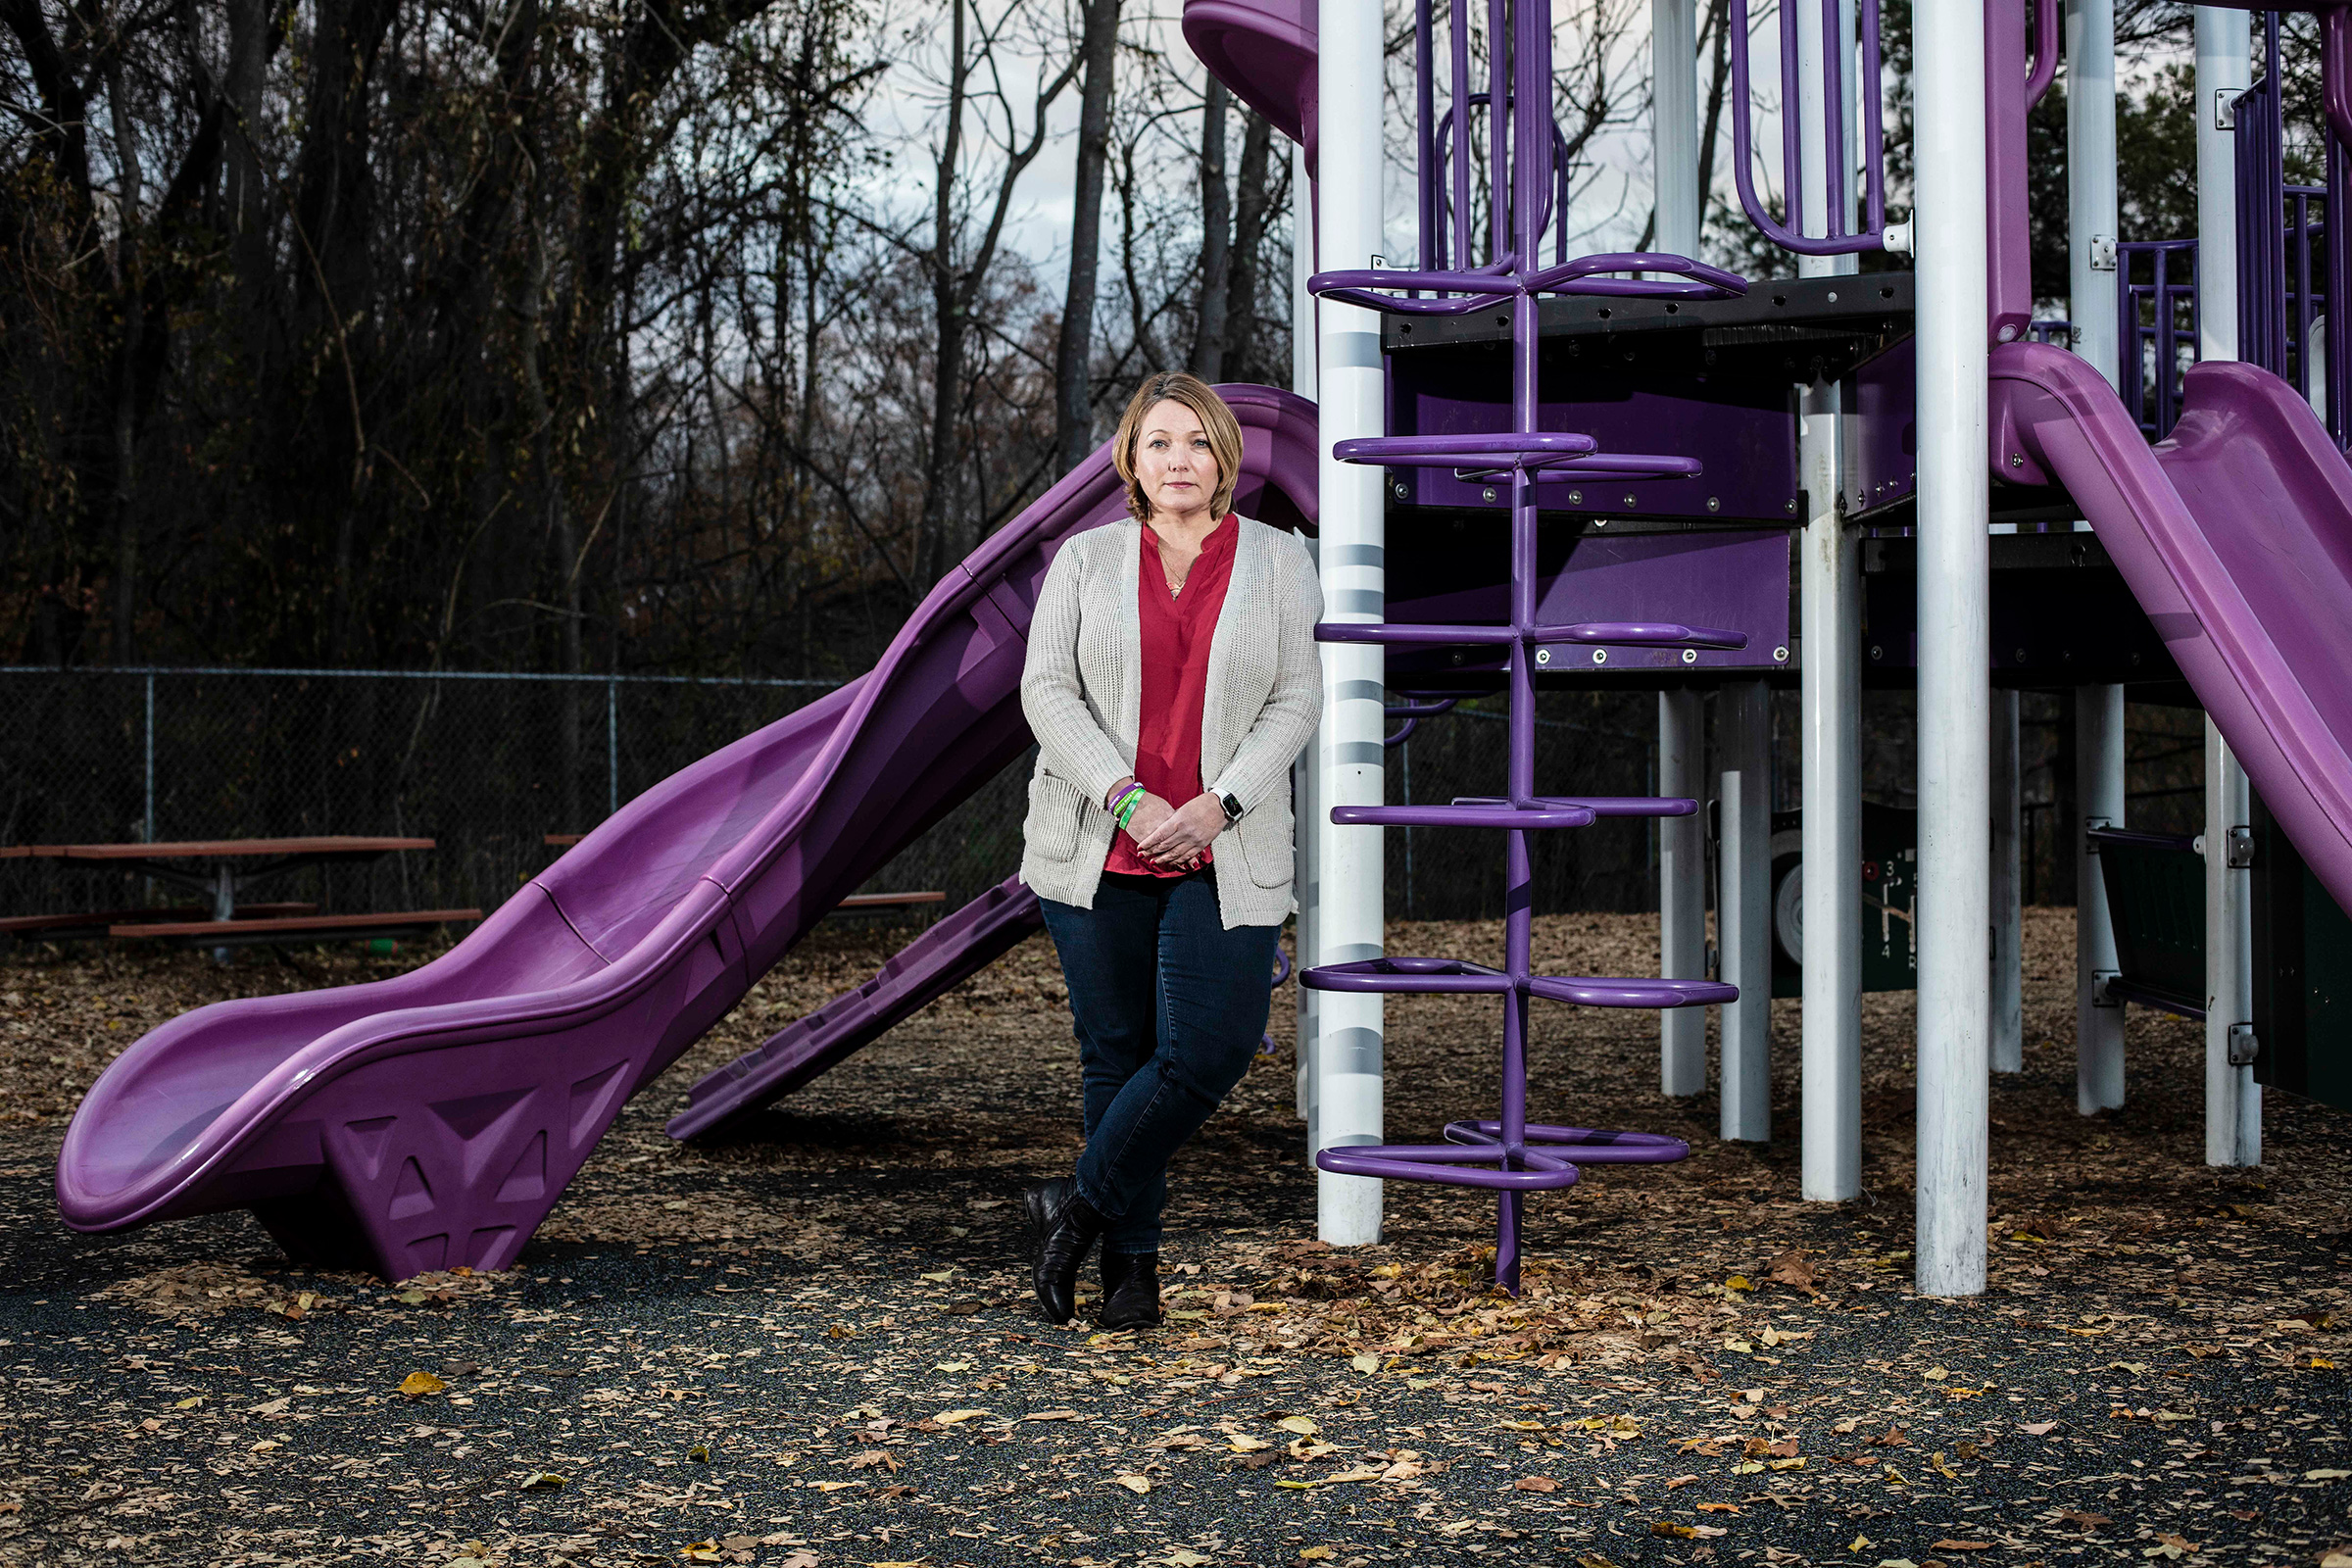 Nicole Hockley poses for a portrait at a playground built in memory of her son Dylan Hockley who was killed during the Sandy Hook Elementary shooting in Westport, Conn. (Bryan Anselm—Redux)